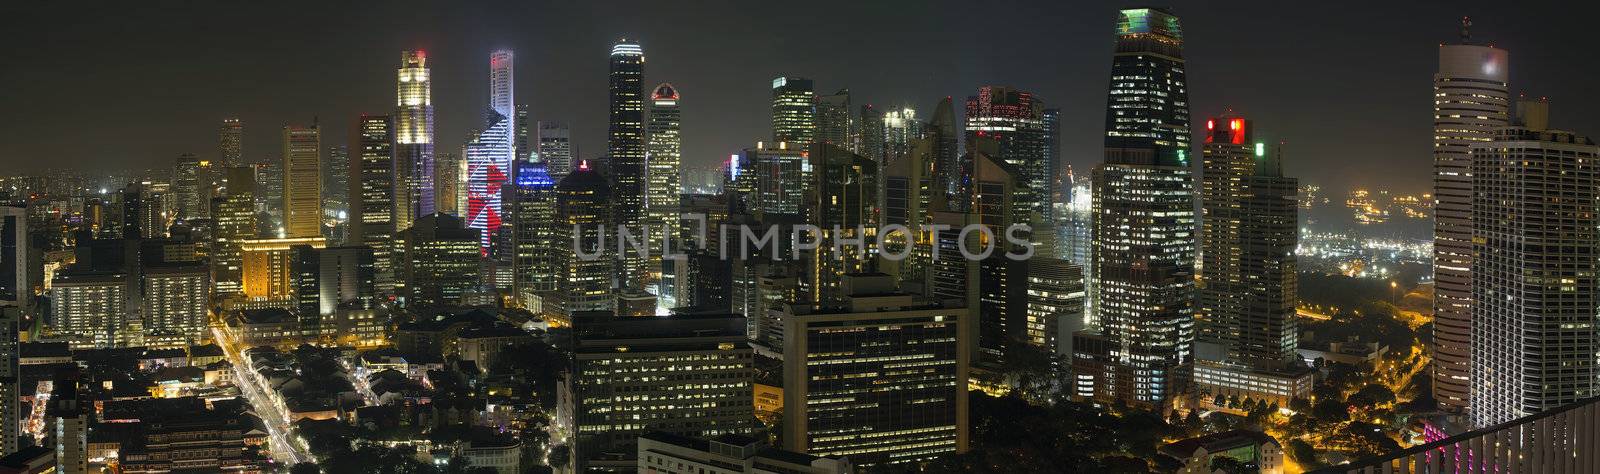 Singapore Financial District Skyline at Night by jpldesigns